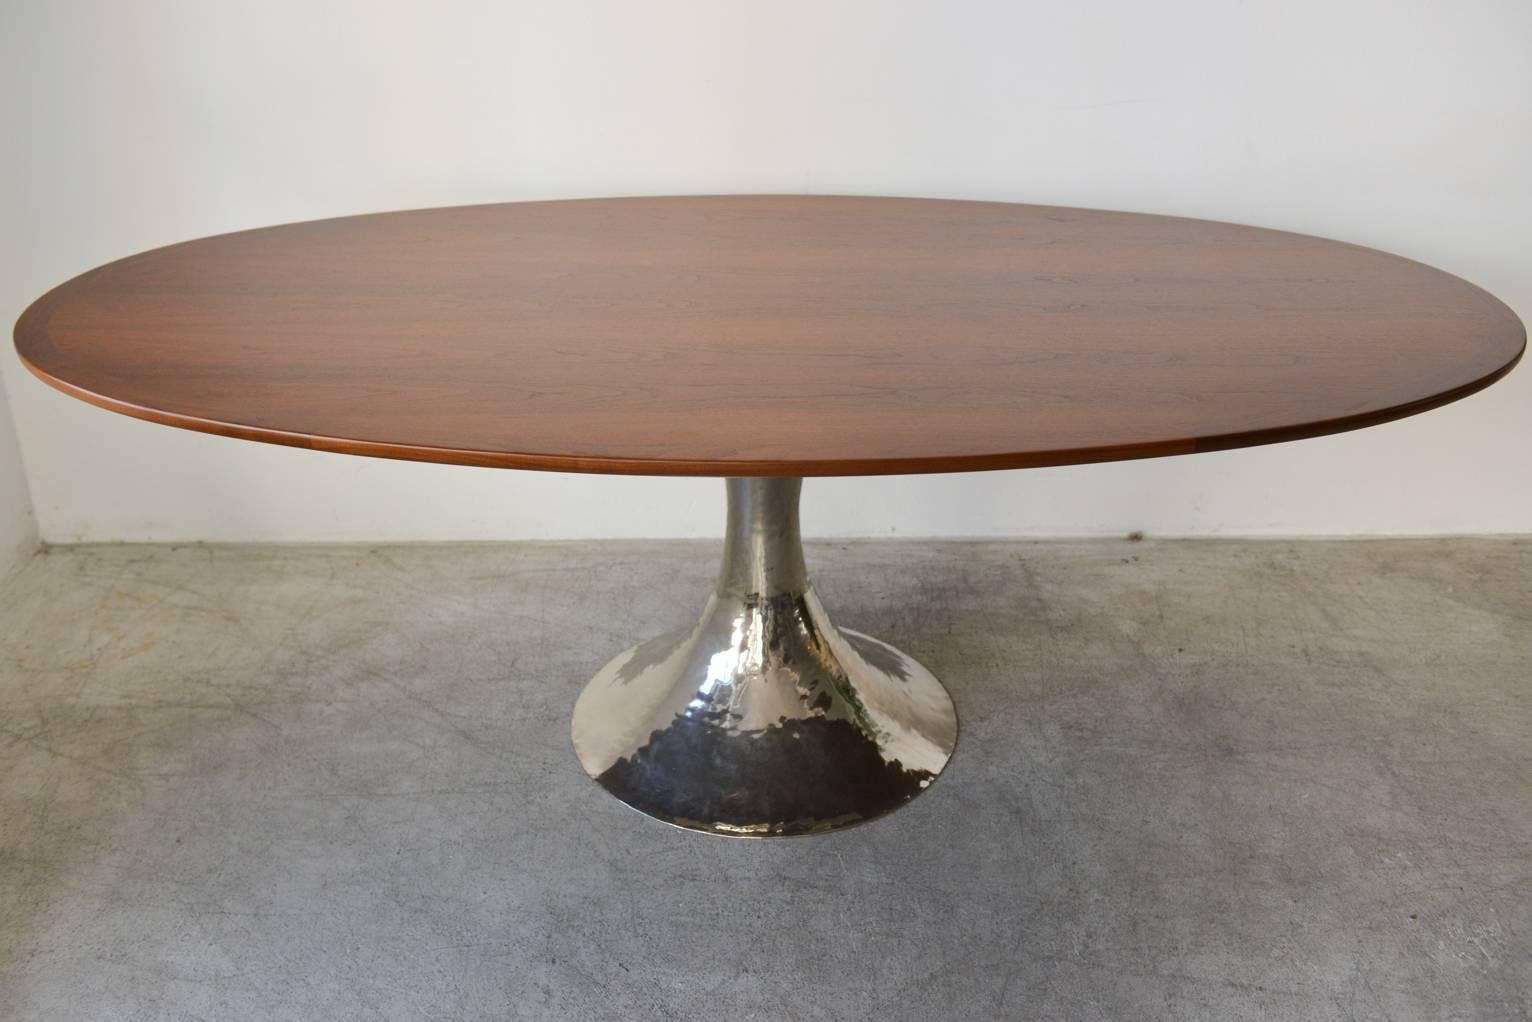 Beautiful walnut oval dining table with cross grain edging and hand-hammered nickel base.

Measures: 79